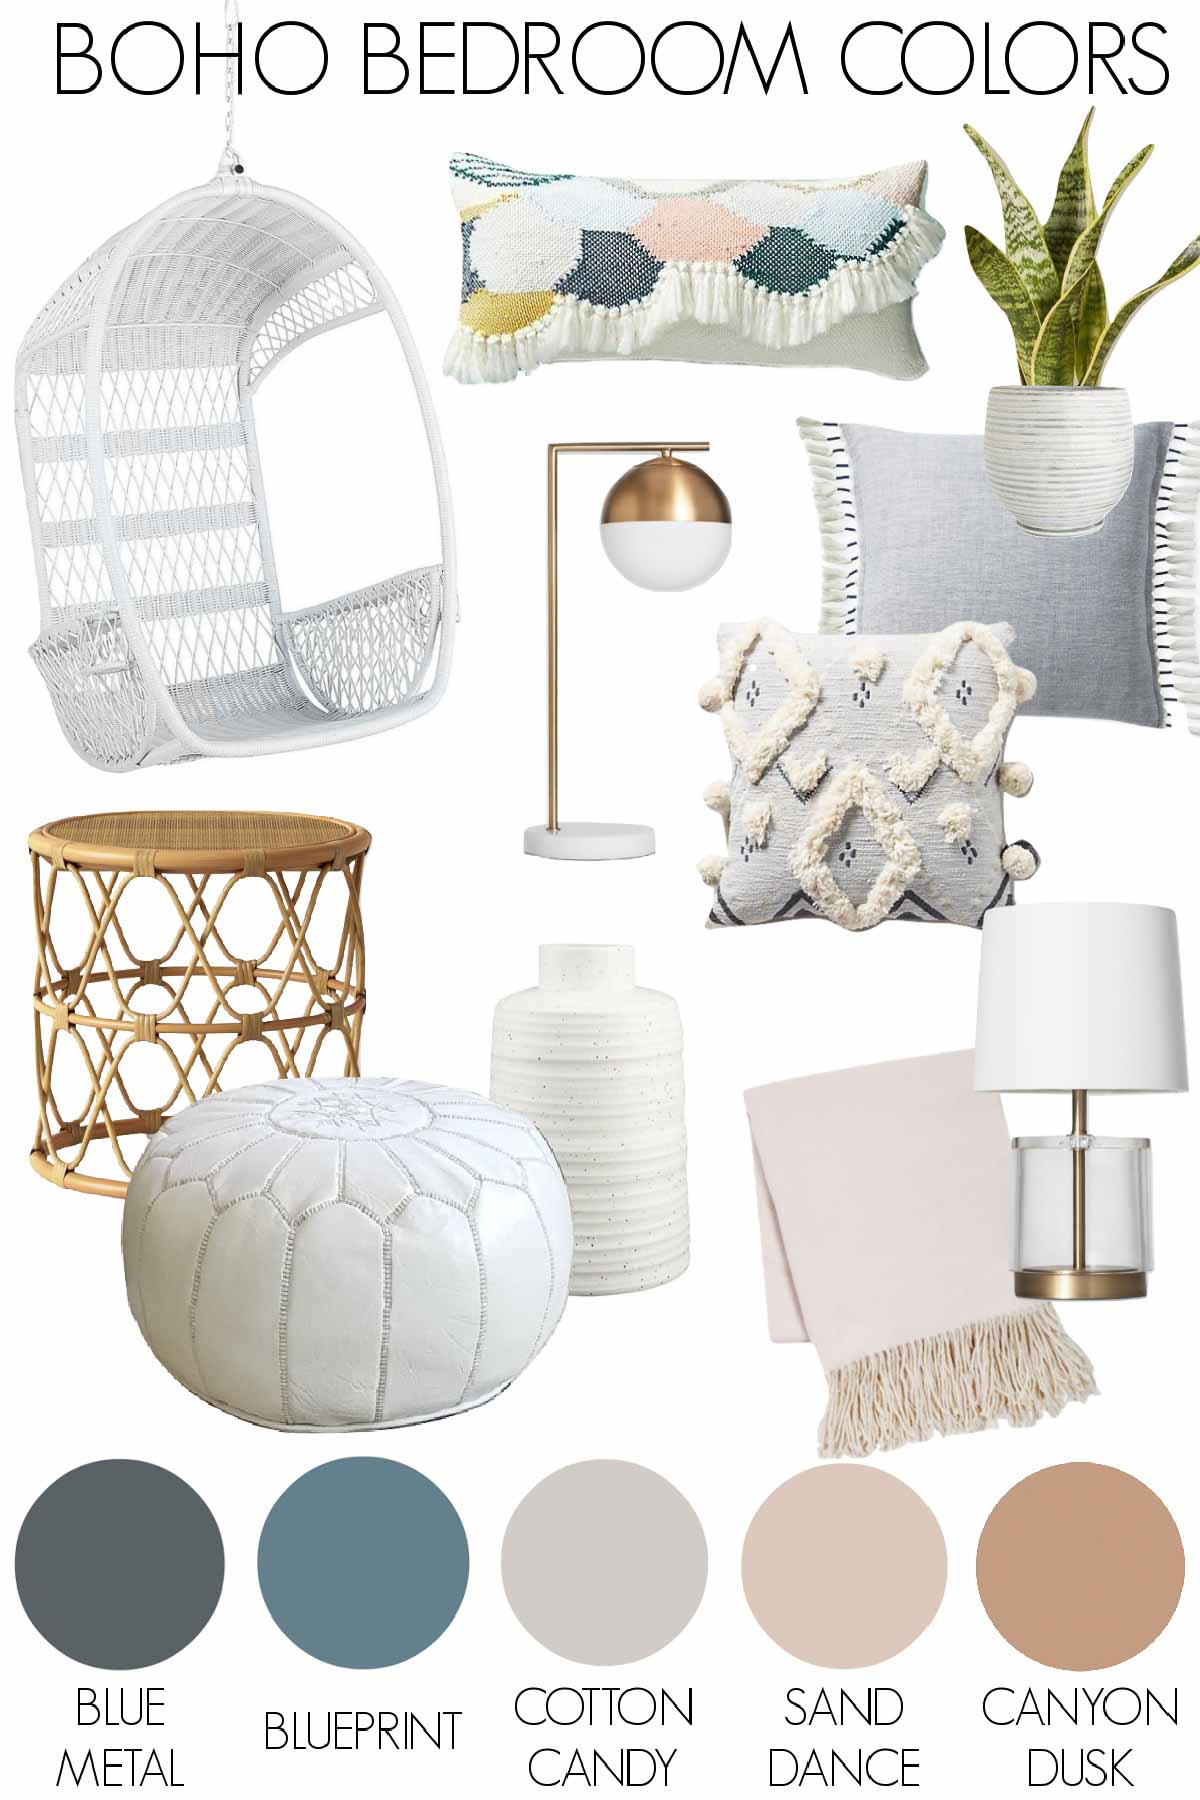 Boho bedroom colors and complementing accessories